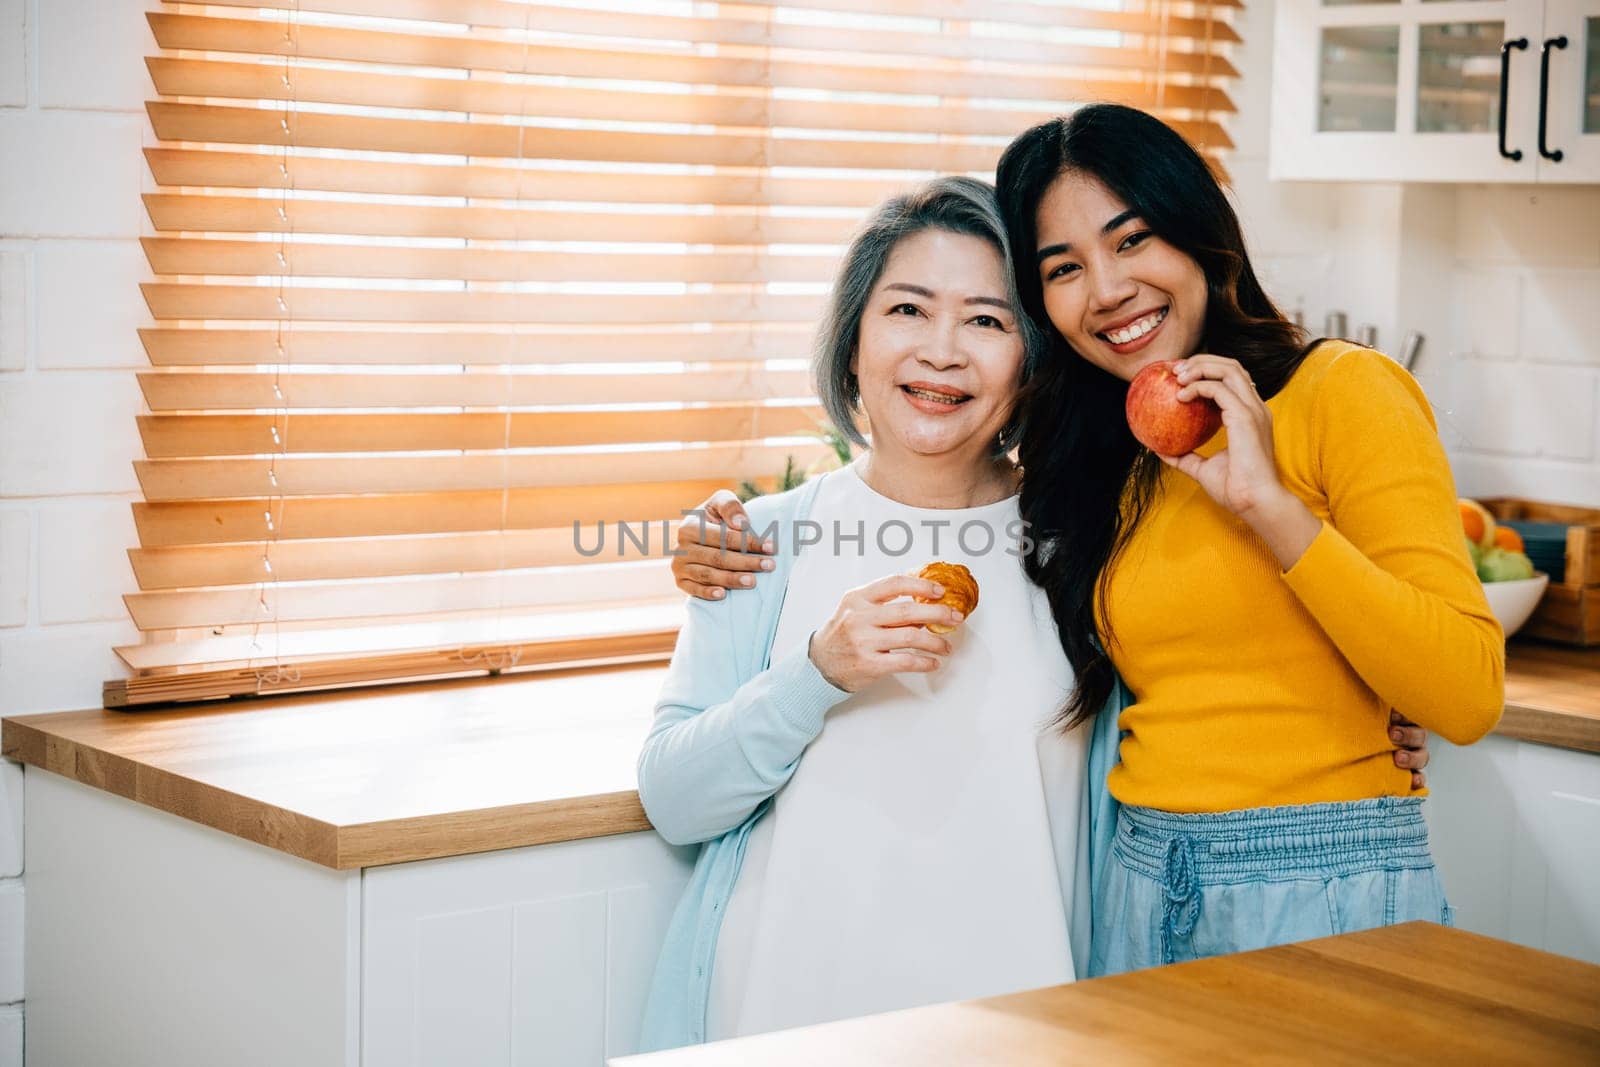 In the house, an old mother and her daughter, a young woman, stand together in the kitchen. They are holding an apple, showcasing the joy of learning and teaching, family, and togetherness. by Sorapop